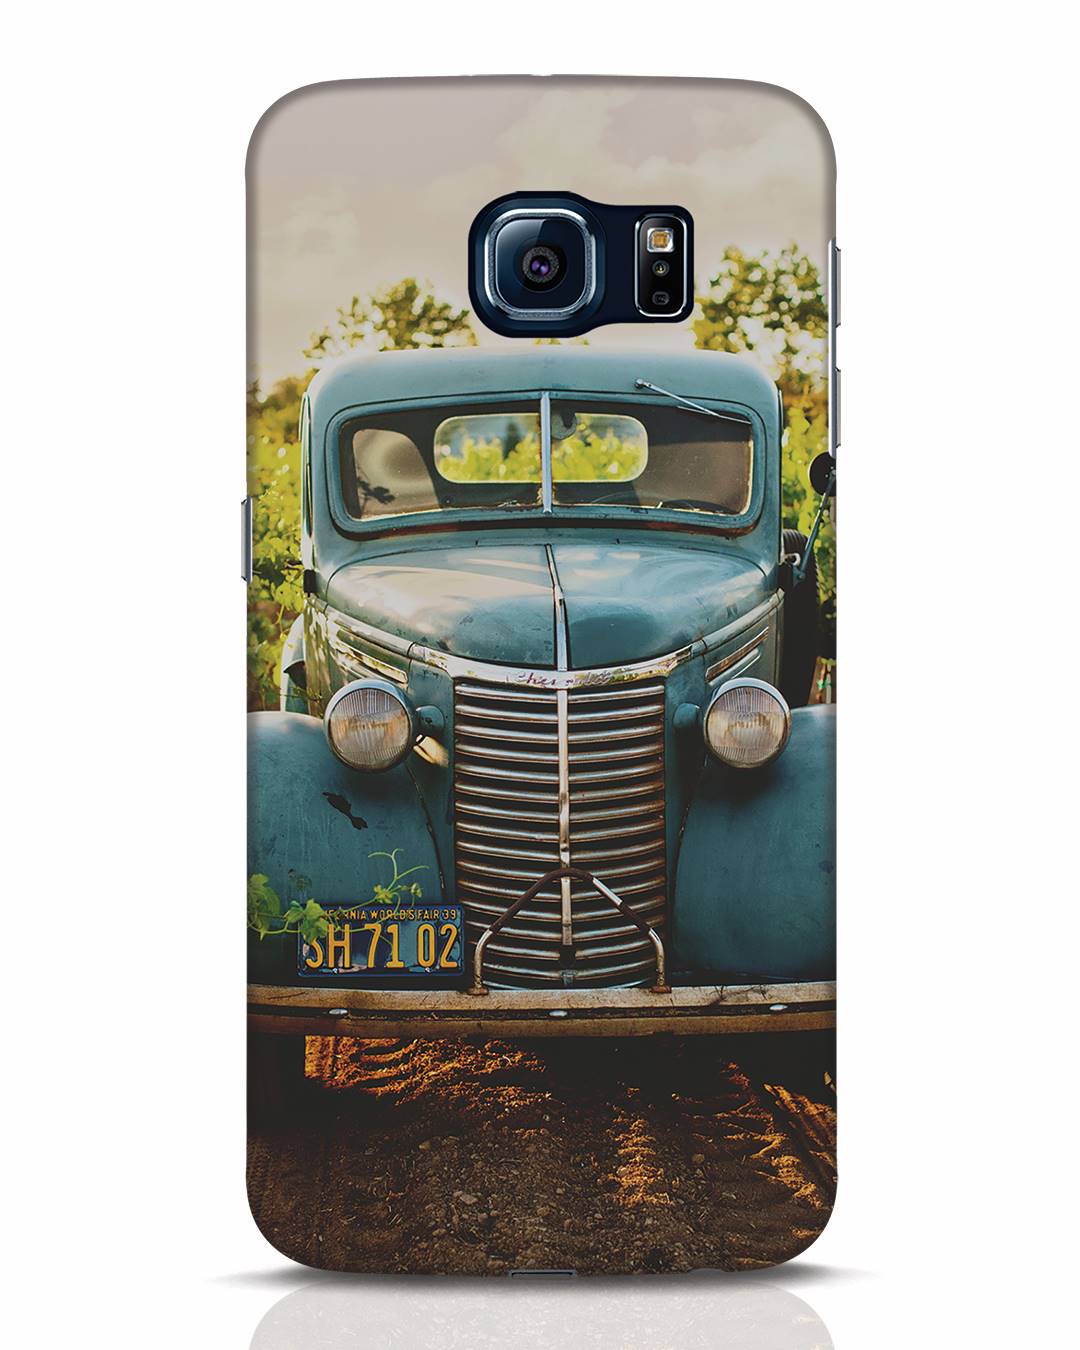 Vintage Love Samsung S6 Mobile Cover Samsung S6 Mobile Covers Bewakoof.com